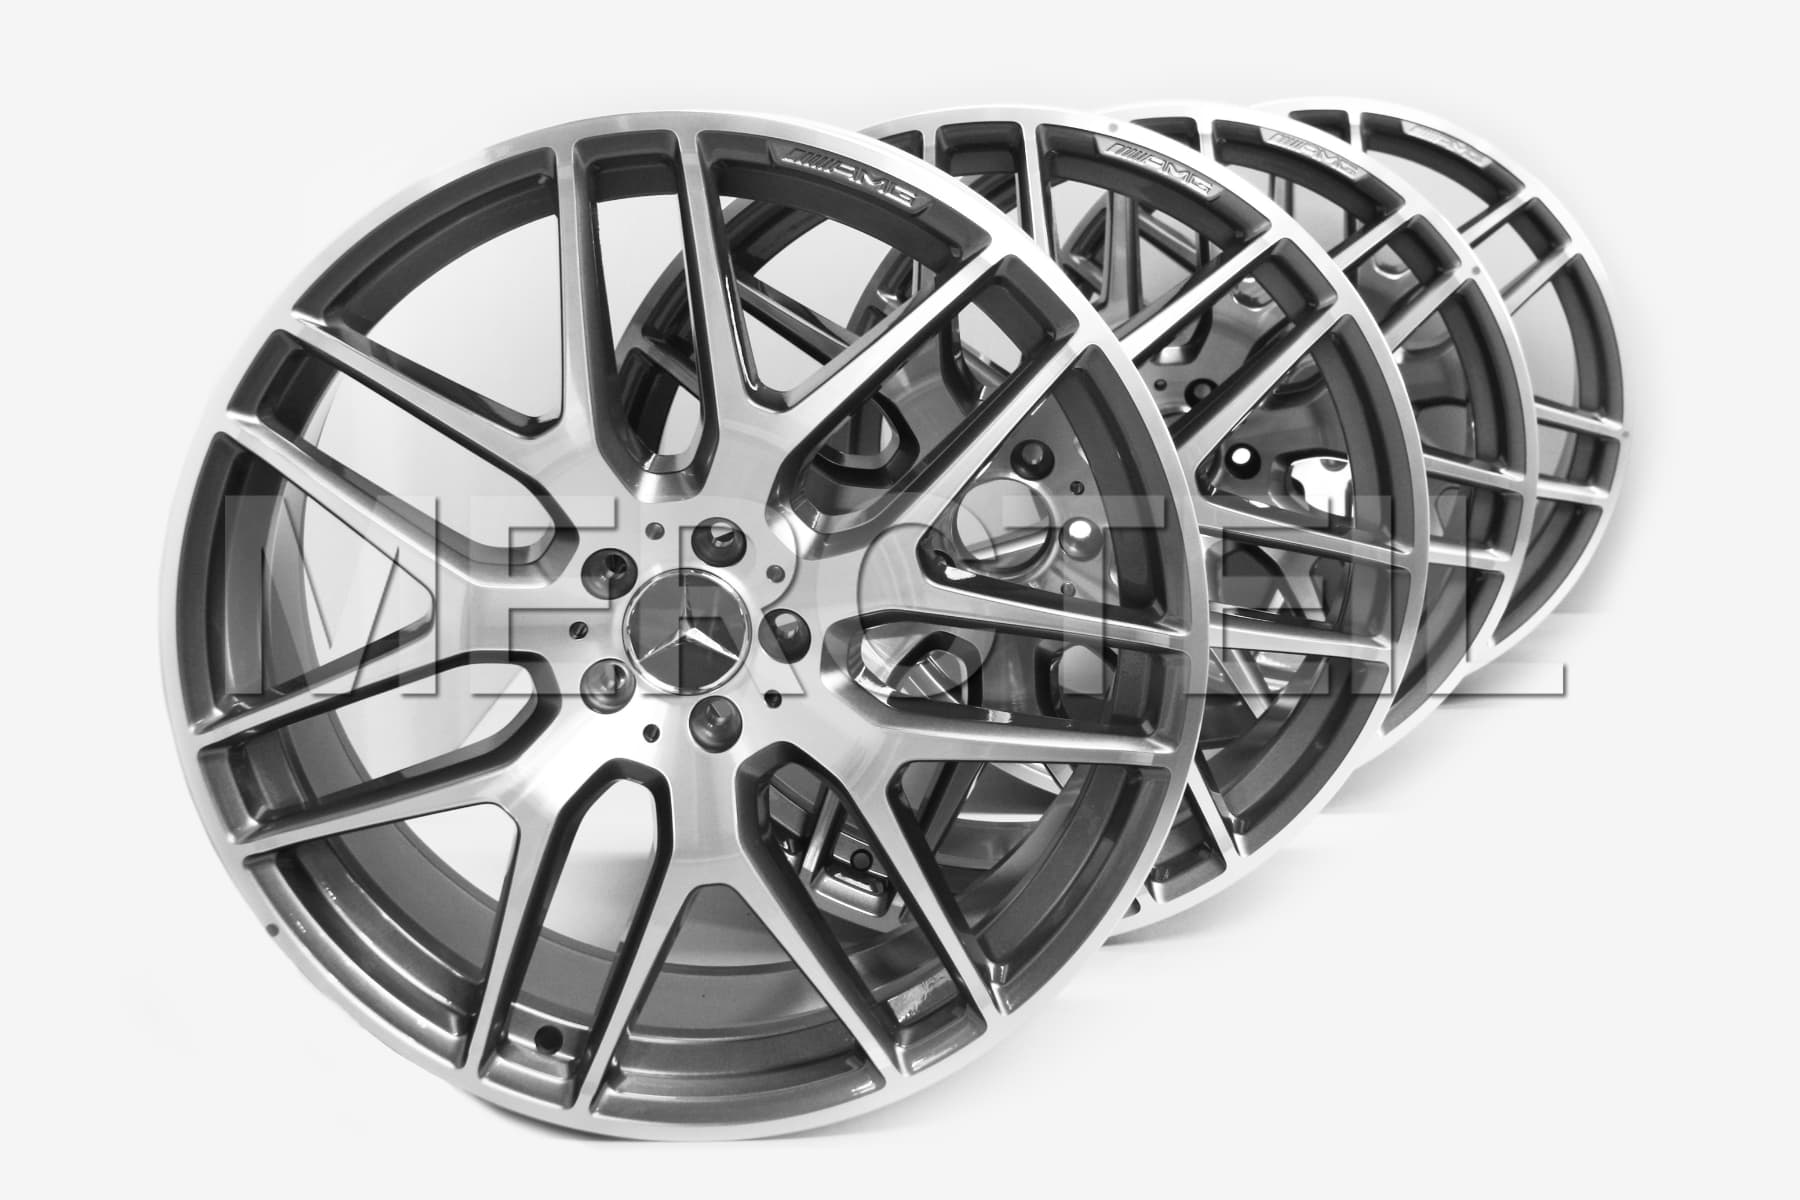 AMG R21 Set Of Alloy Wheels Part Number A16640128007X21, 1664012800 7X21.